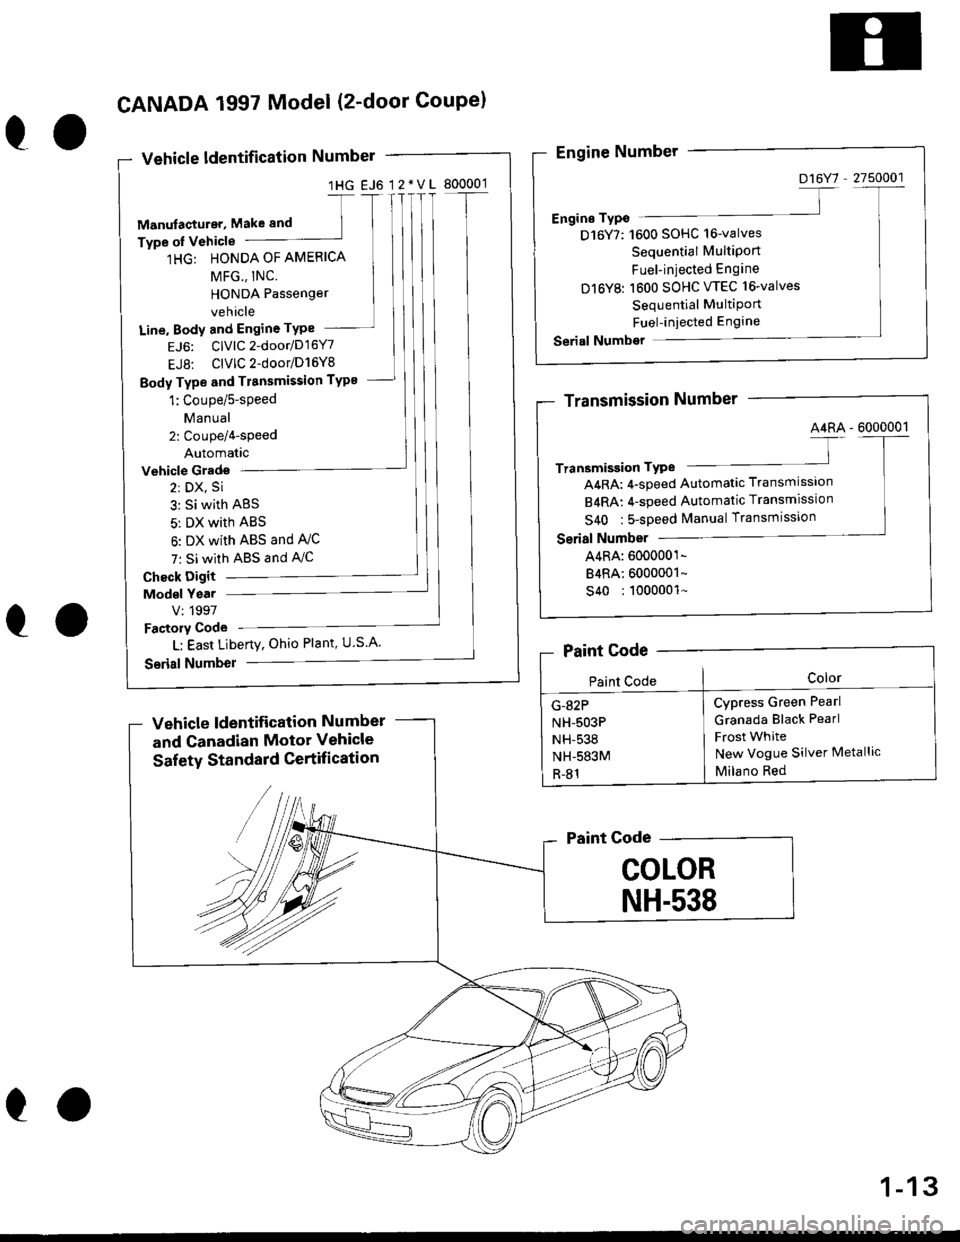 HONDA CIVIC 1997 6.G Workshop Manual 1HG EJ6 12*VL 800001
1HG: HONDA OF AMERICA
Line, Body and Engine TYPe
EJ6: ClvlC2-door/D16Y7
EJ8: ClVlC2-door/D16Y8
Body Type and Tr8nsmission TYP8
Vehicle Grado
2: DX, Si
3: Si with ABS
5: DX with AB